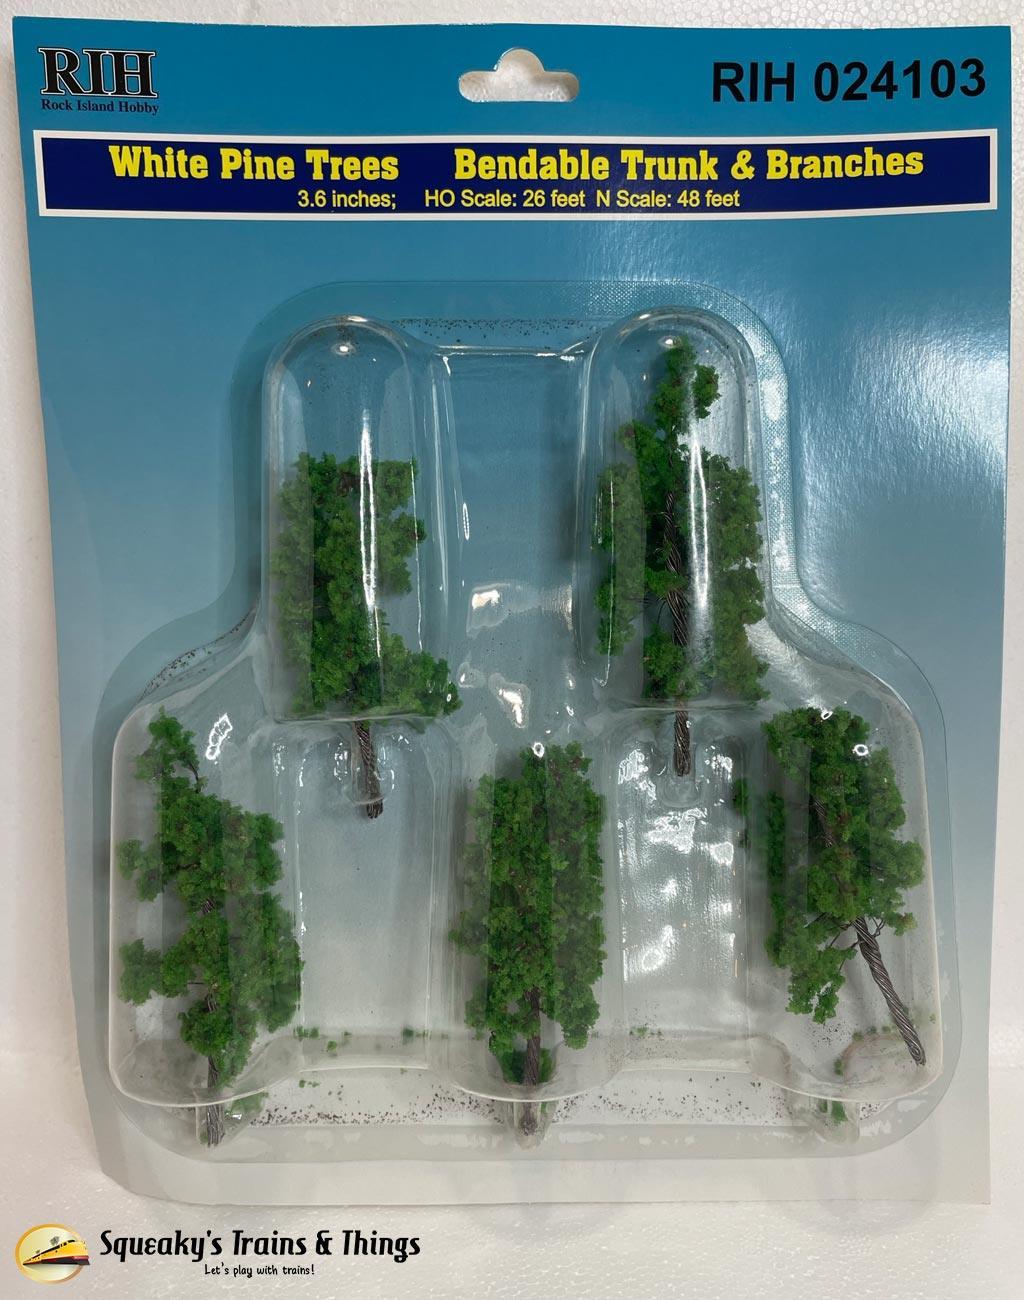 Rock Island Hobby 024103 | White Pine Trees with Bendable Trunk and Branches (5) | Multi Scale